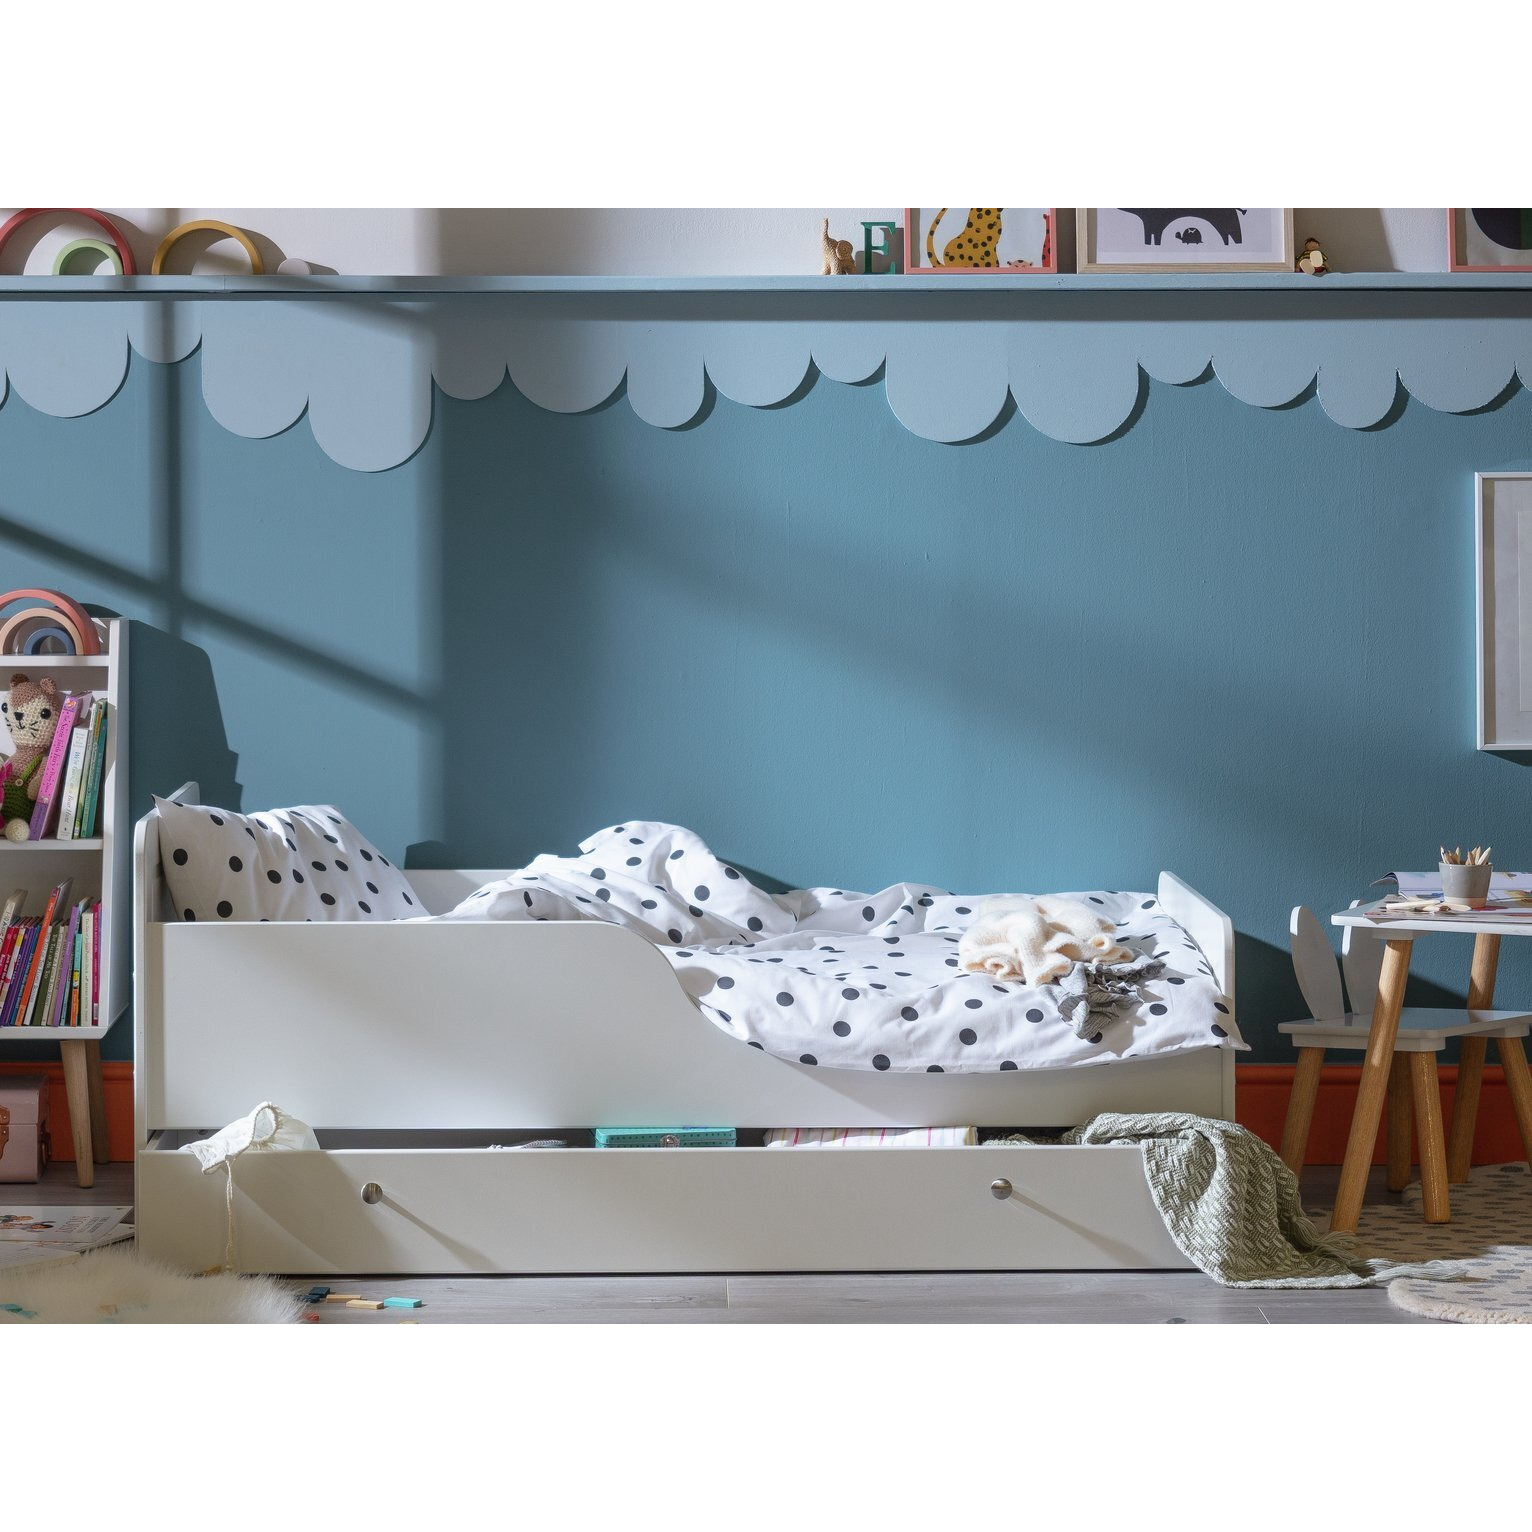 Habitat Brooklyn Toddler Bed With Drawer - White - image 1